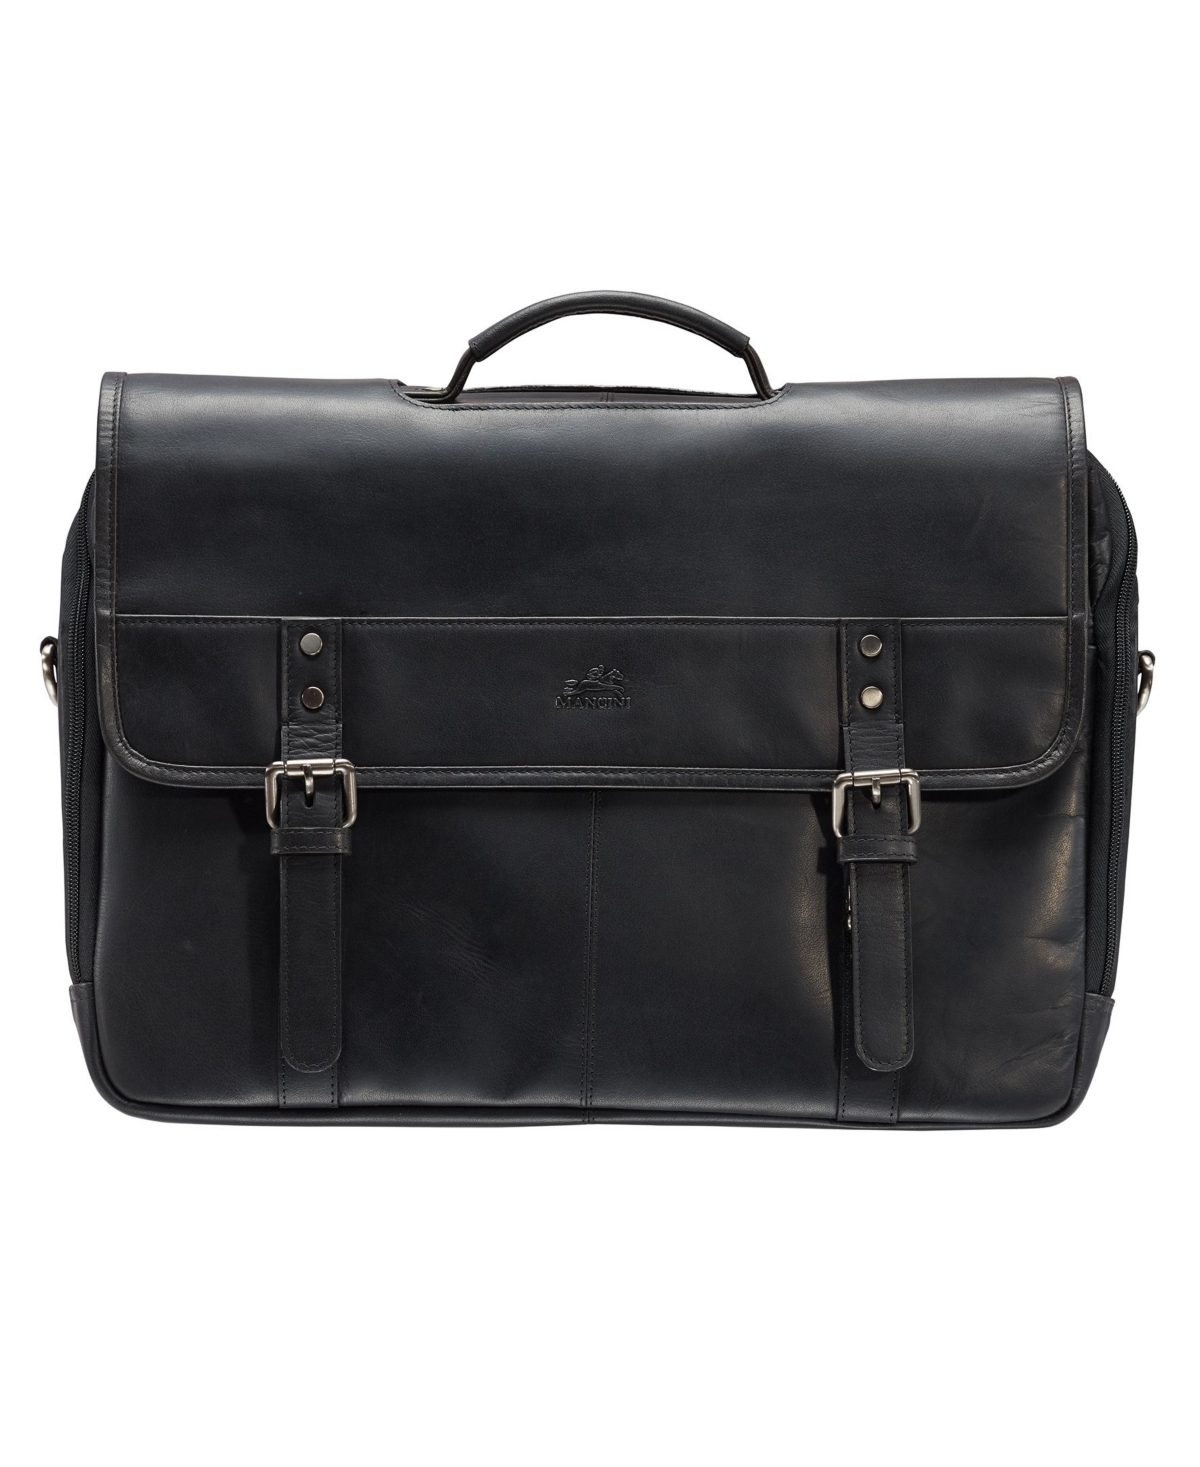 Men's Double Compartment Briefcase with Rfid Secure Pocket for 15.6" Laptop and Tablet - Black